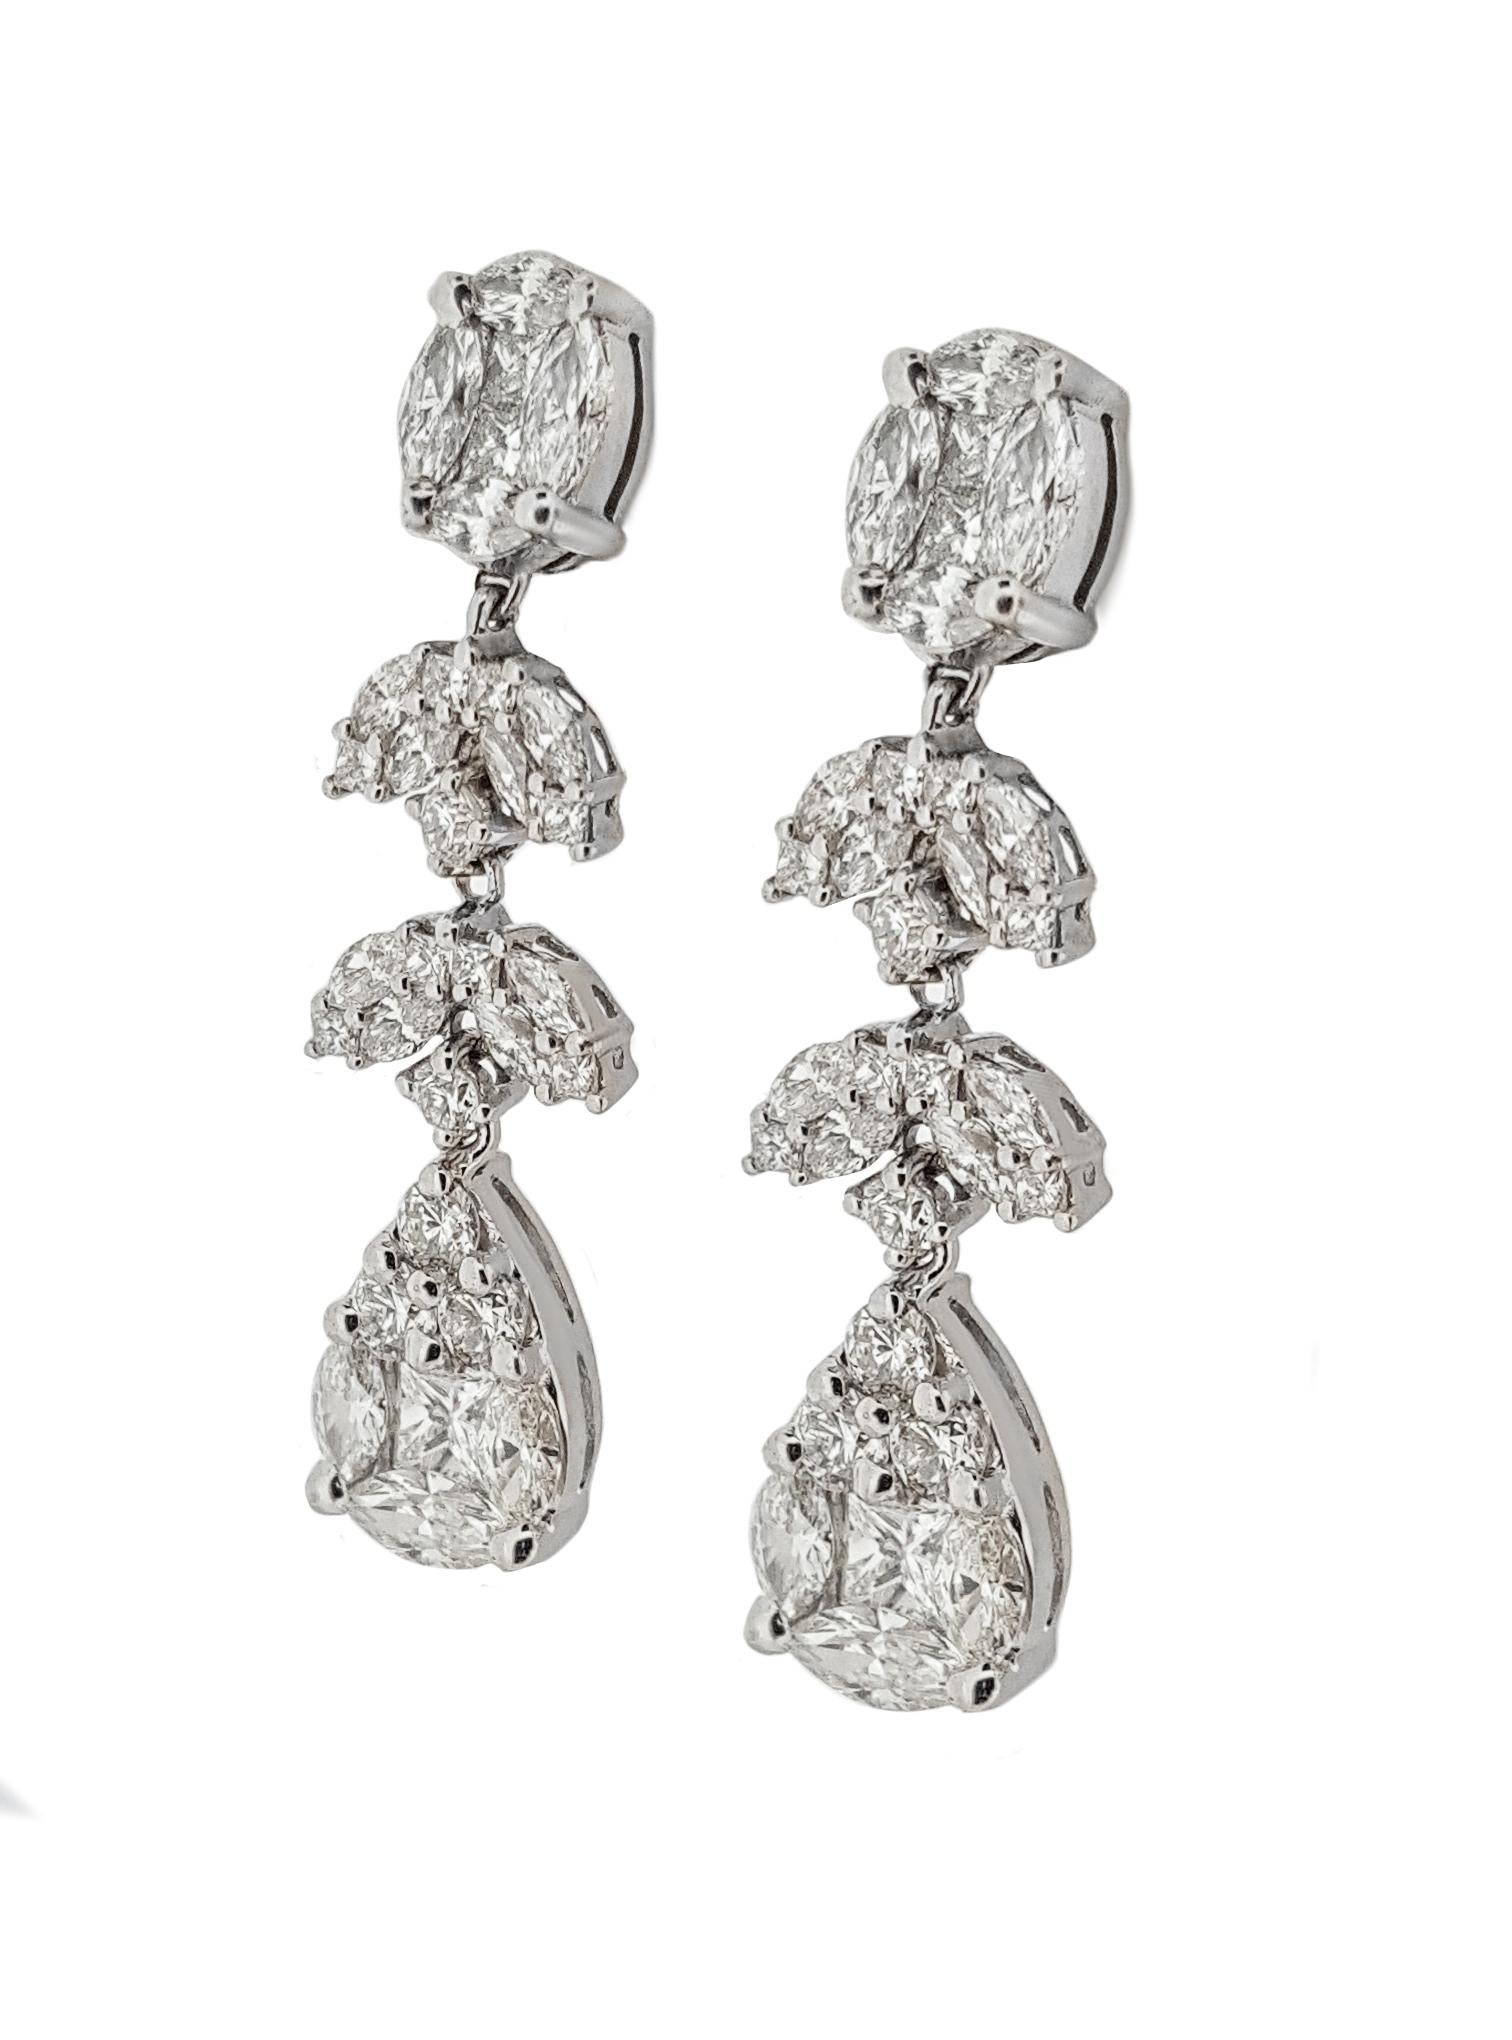 You are sure to sparkle with these incredible diamond cluster dangle earrings. Set in high polished 14kt white gold and containing 3.28ctw of full cut brilliant diamonds G-I in color and VS in clarity. Earrings measure approximately 1.25 inches long